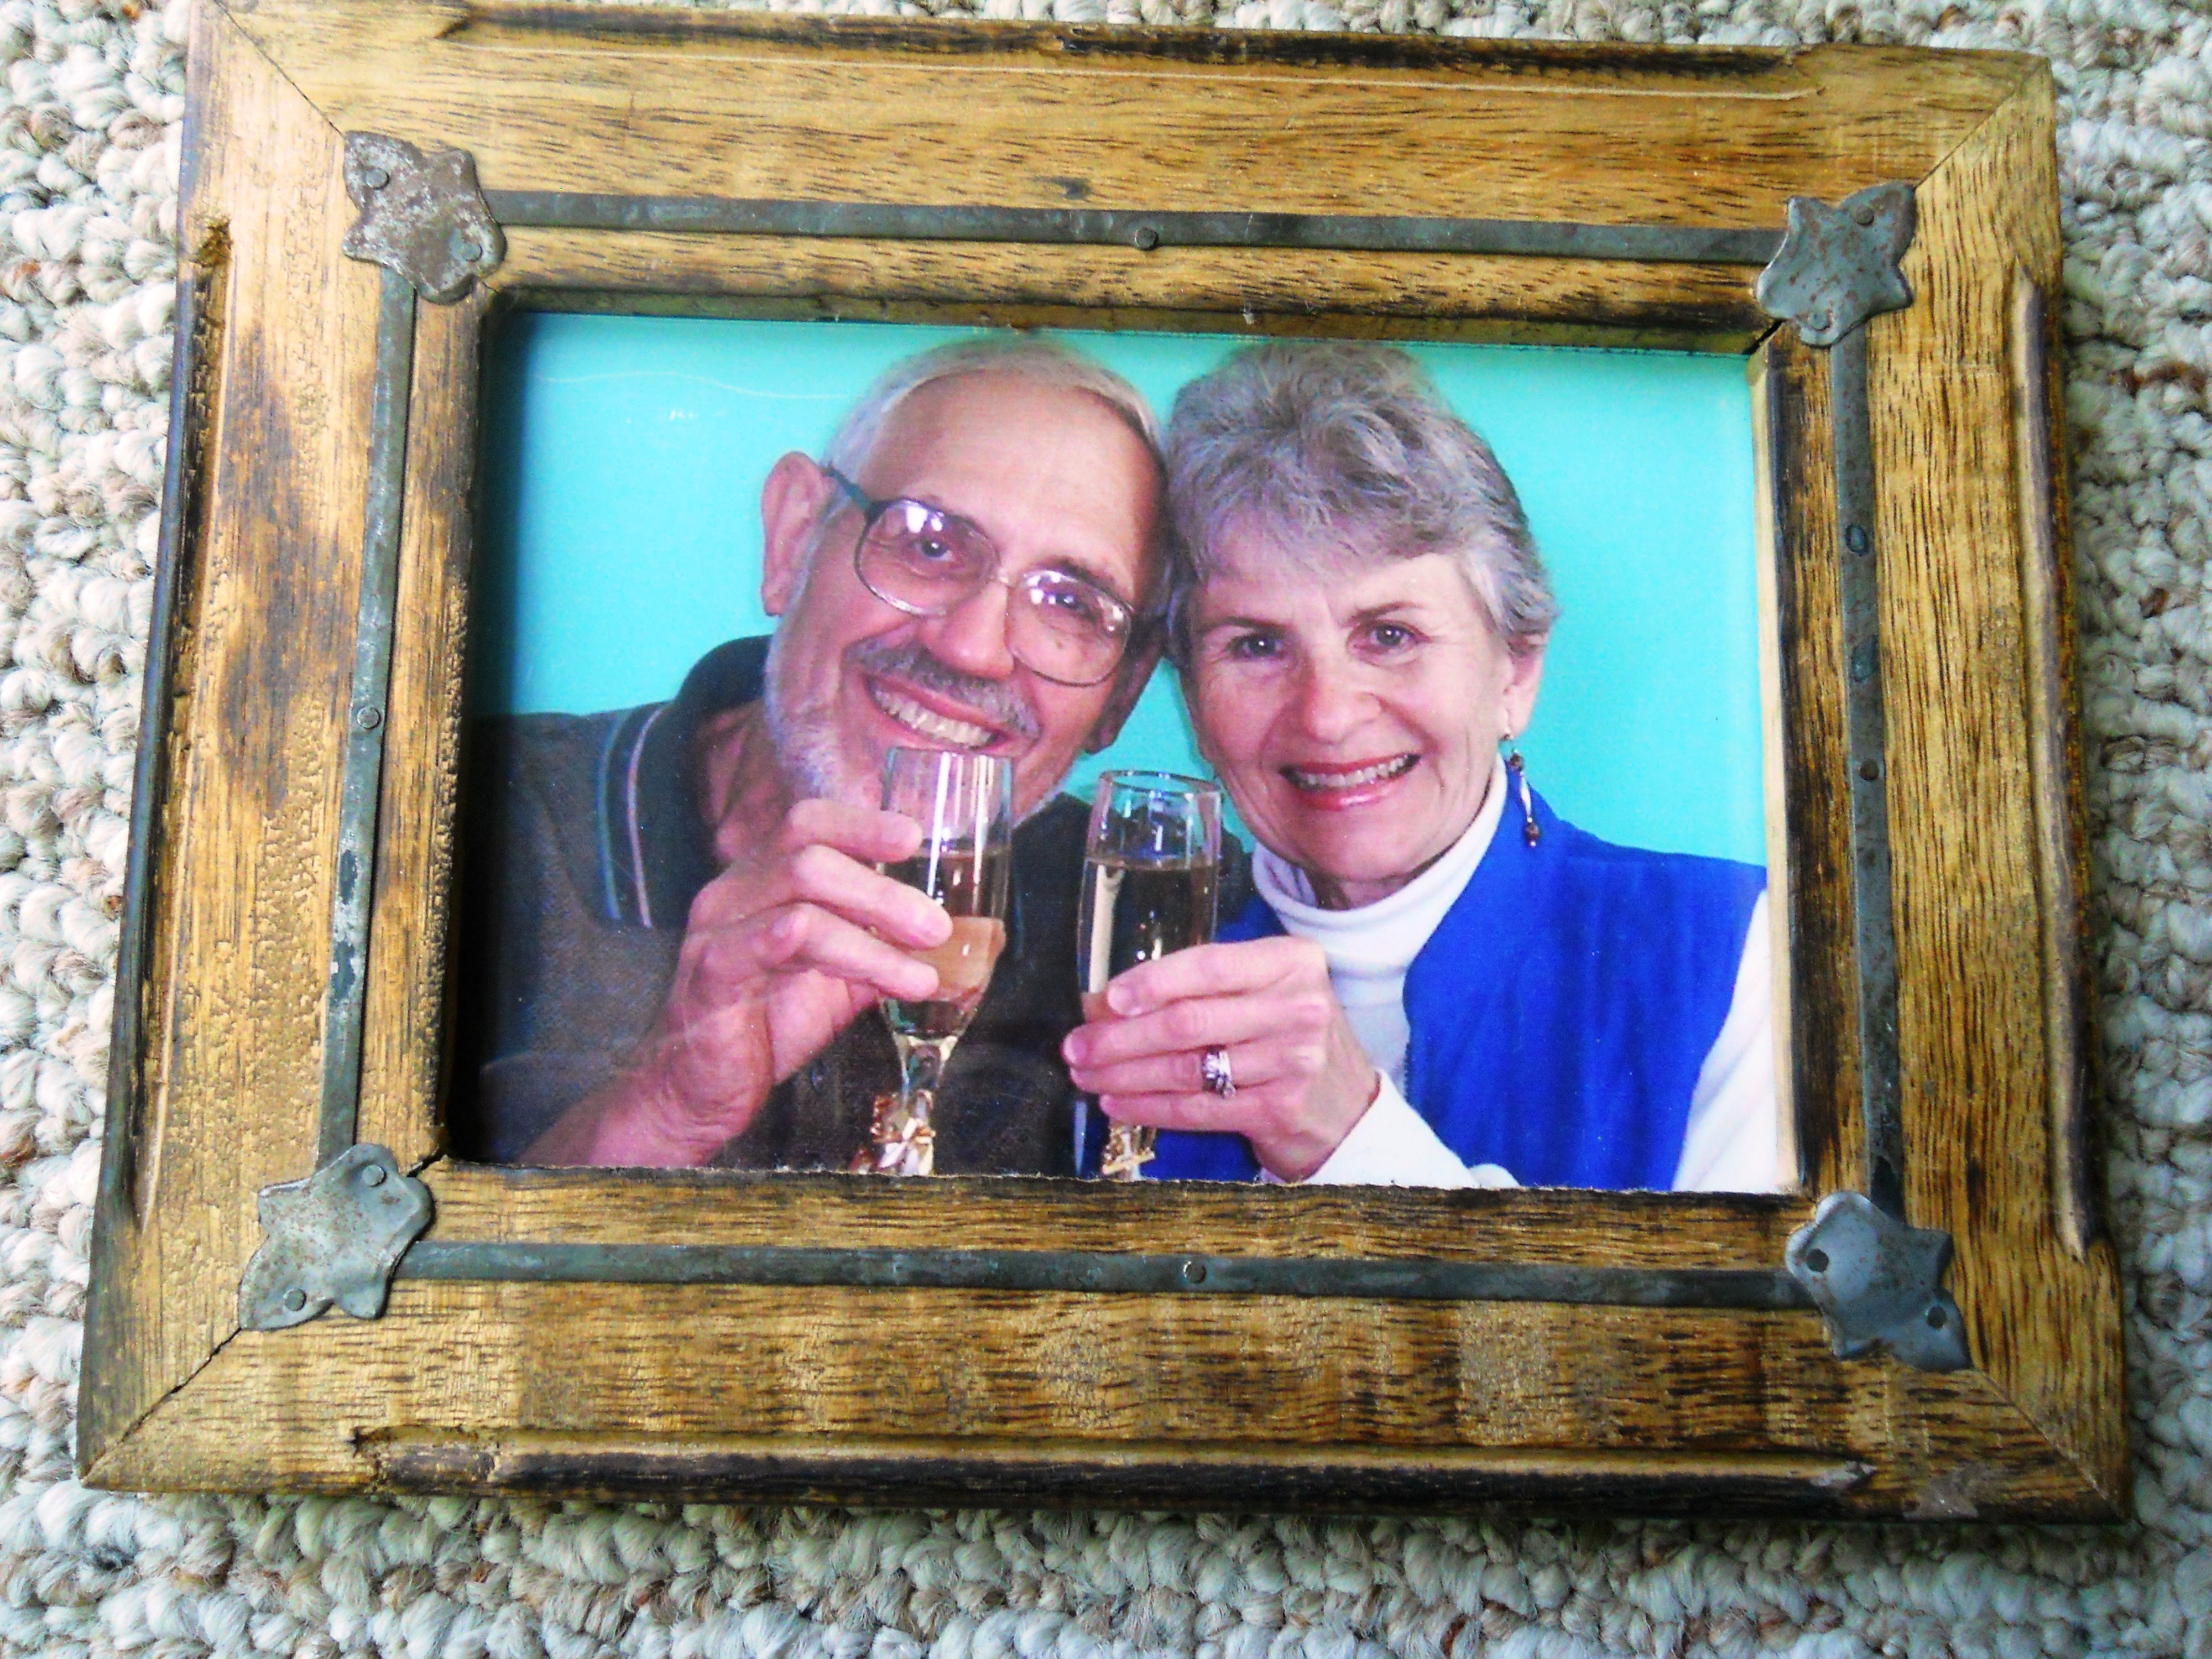 Home made picture frame via Jeff Yeager